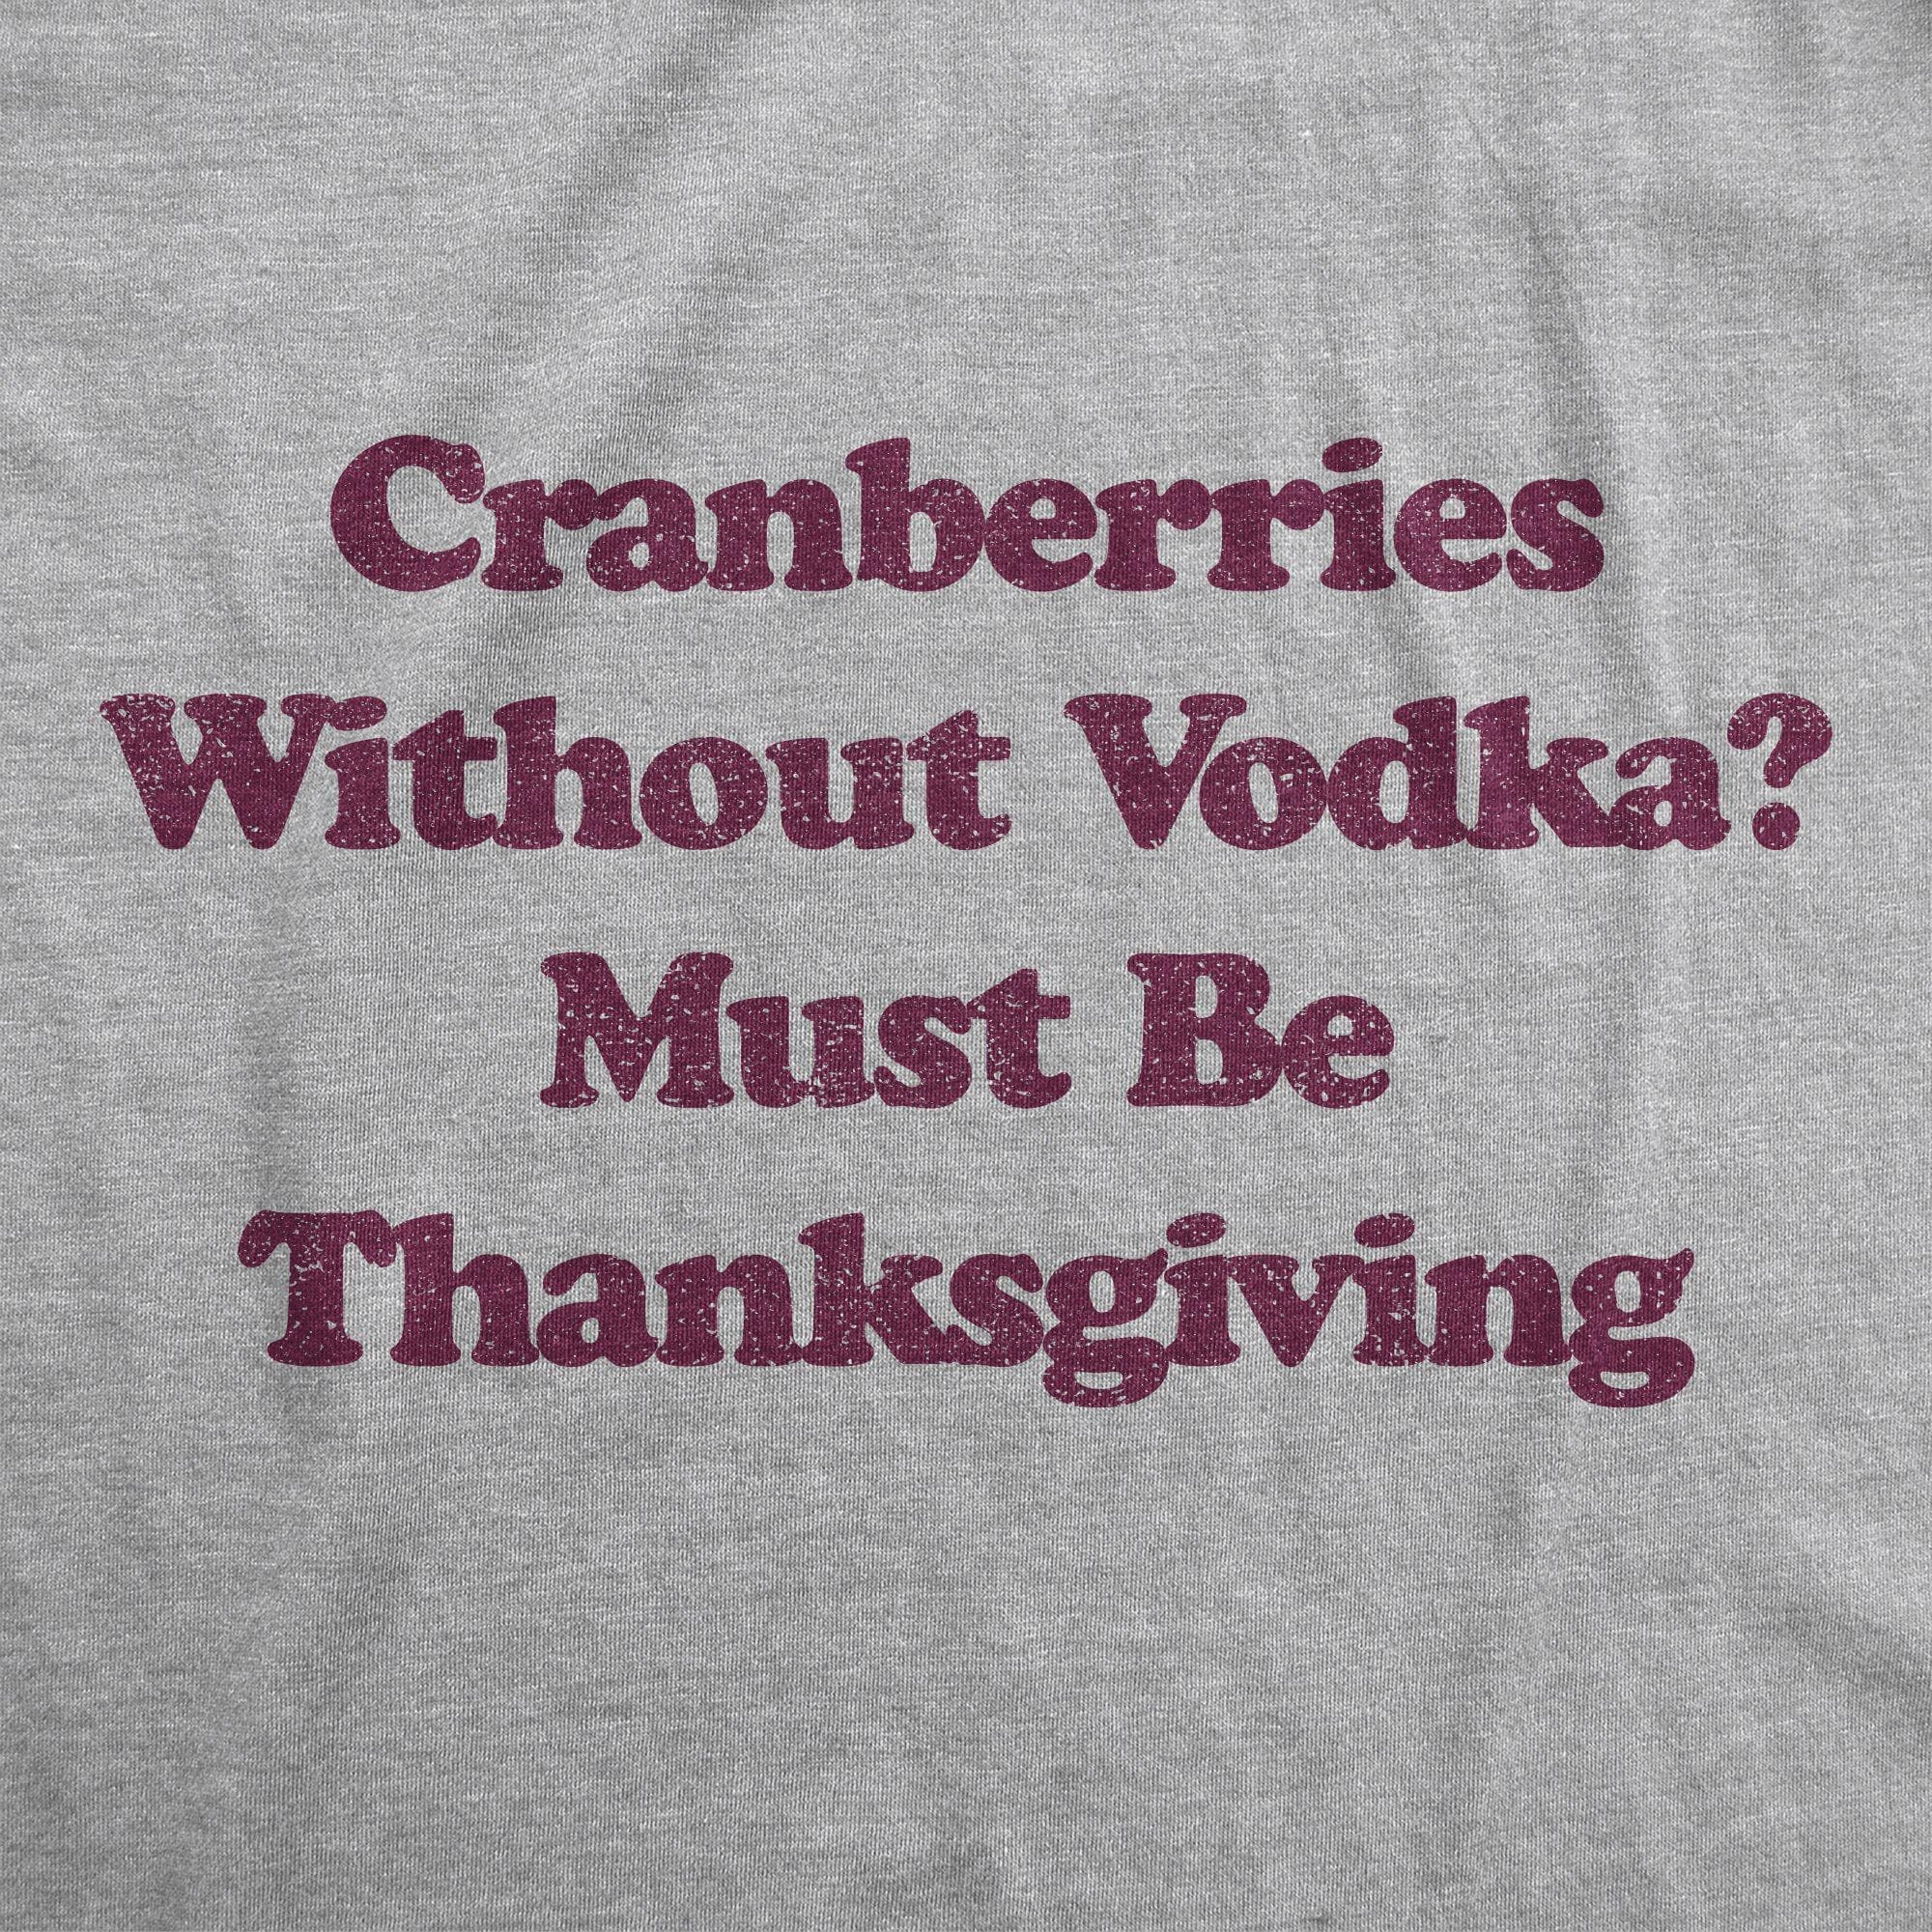 Cranberries Without Vodka? Must Be Thanksgiving Women's Tshirt - Crazy Dog T-Shirts